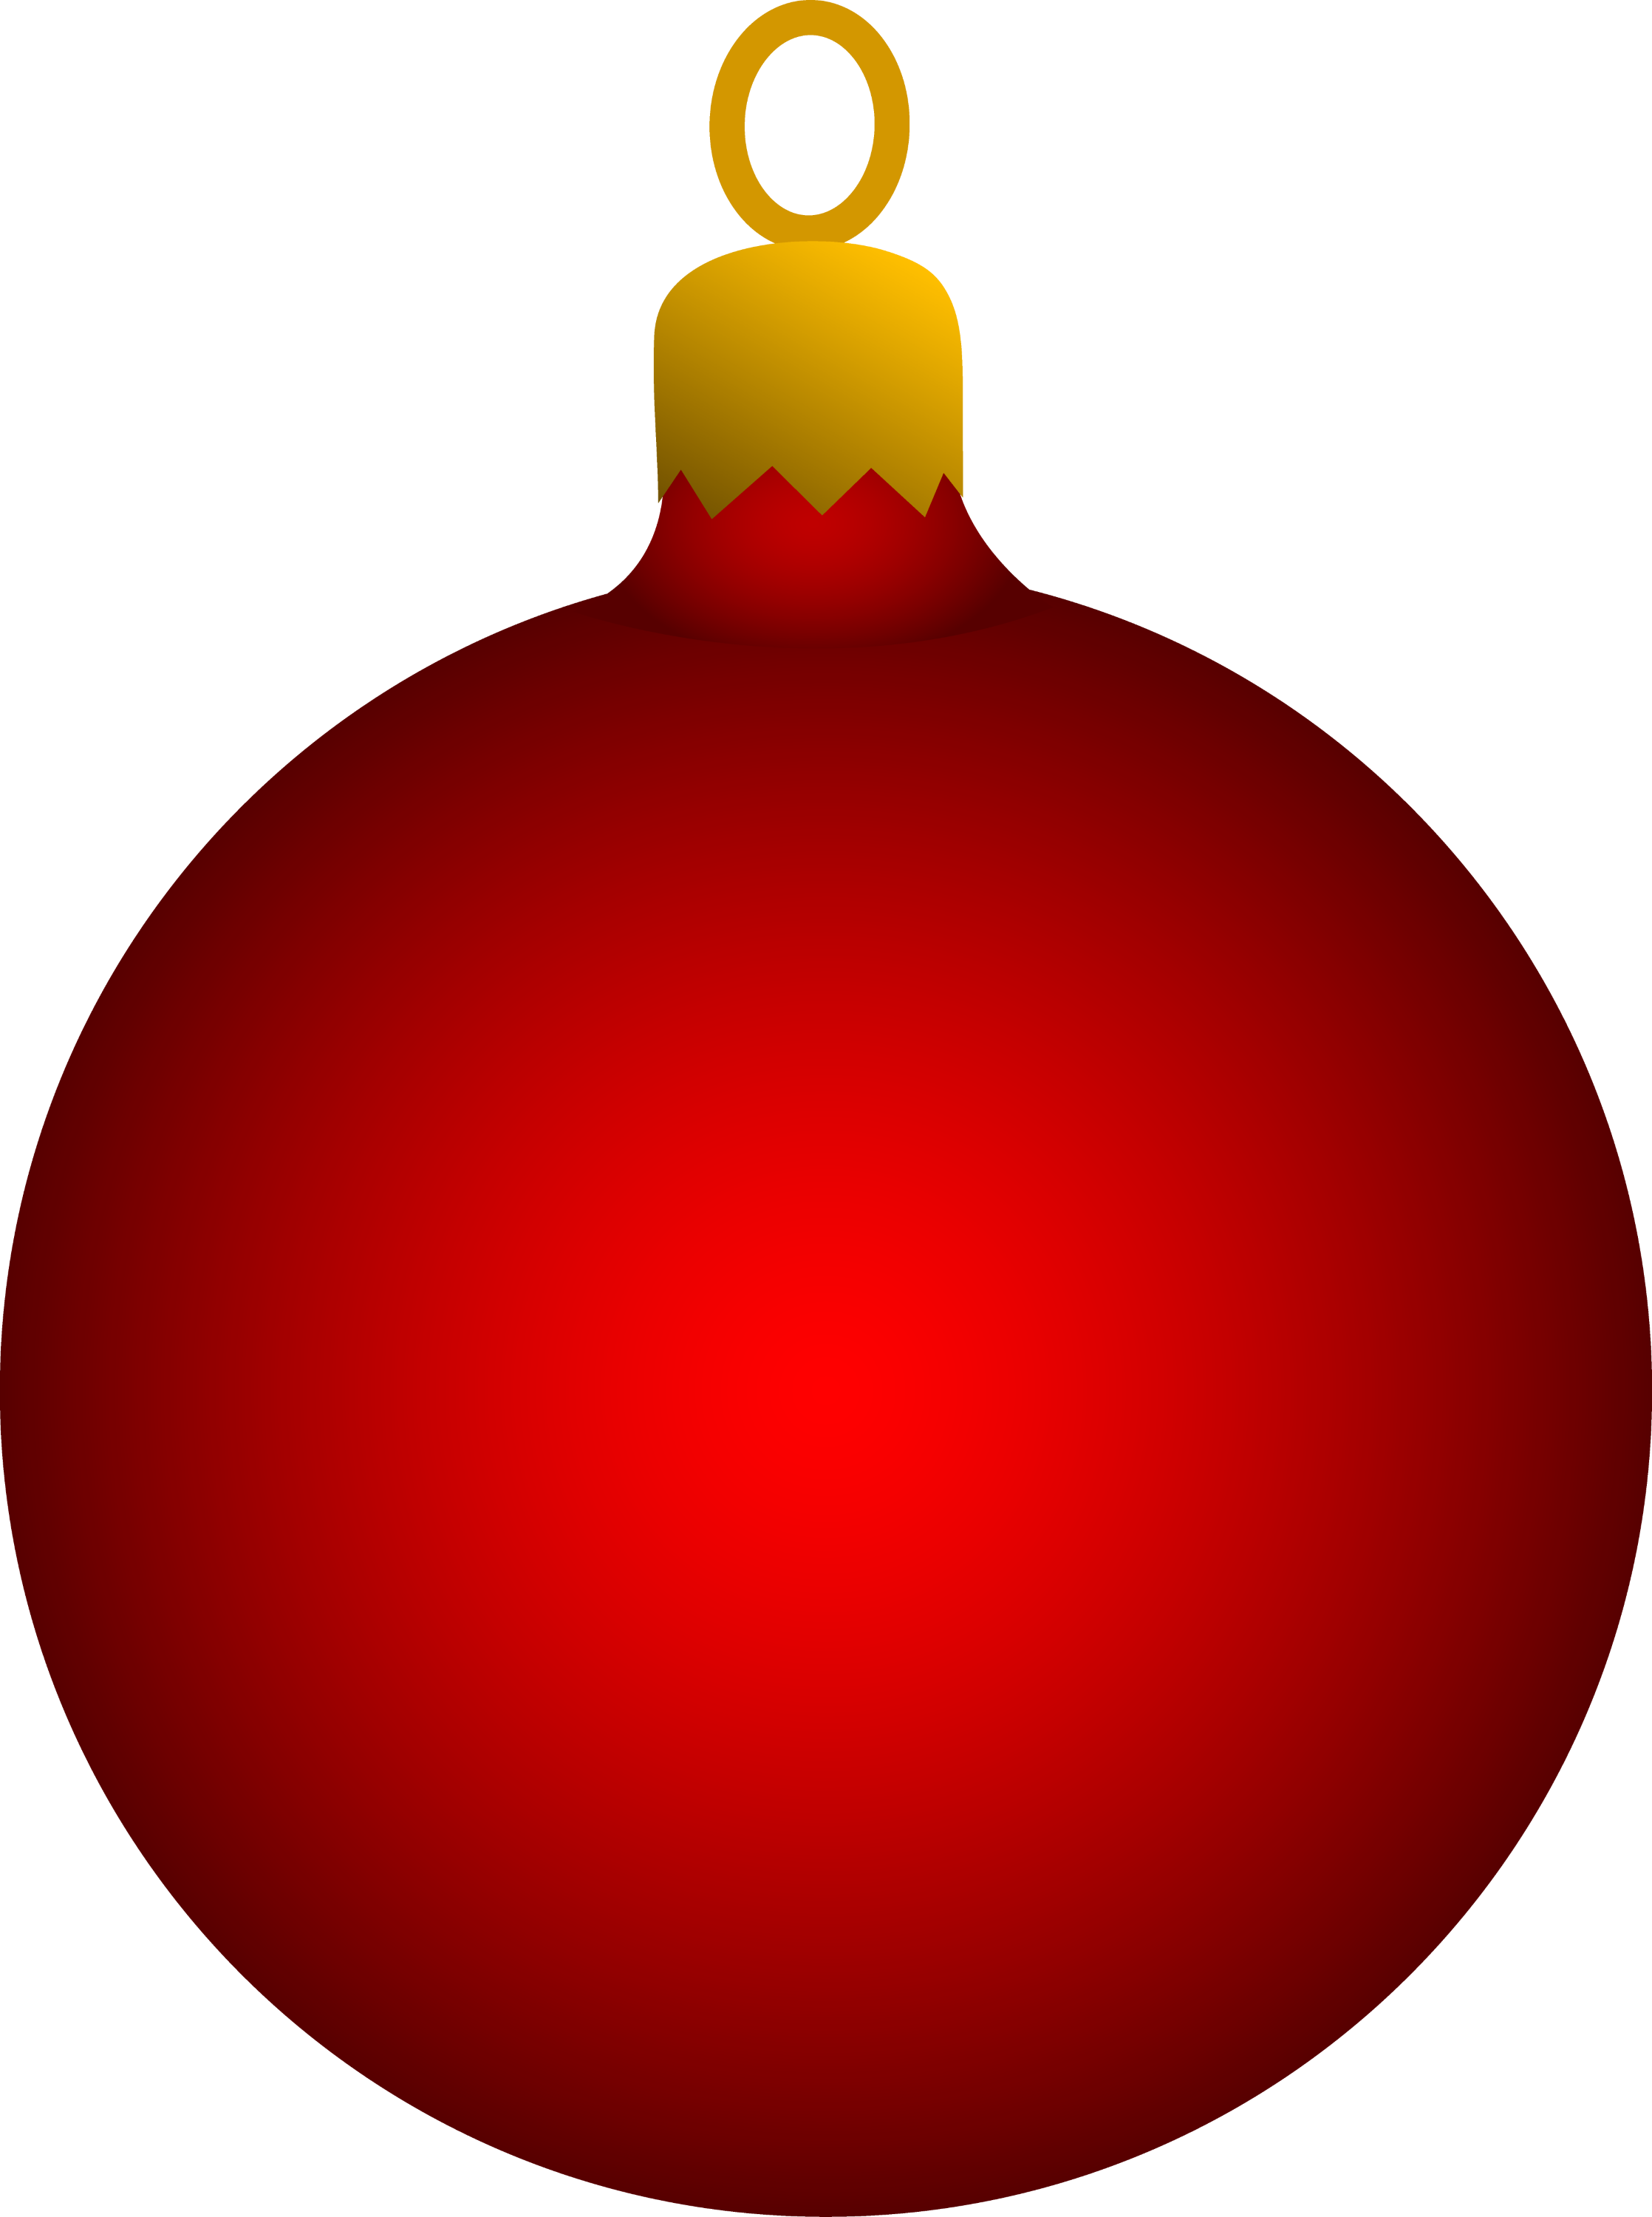 Red Christmas Tree Ornament - Free Clip Art